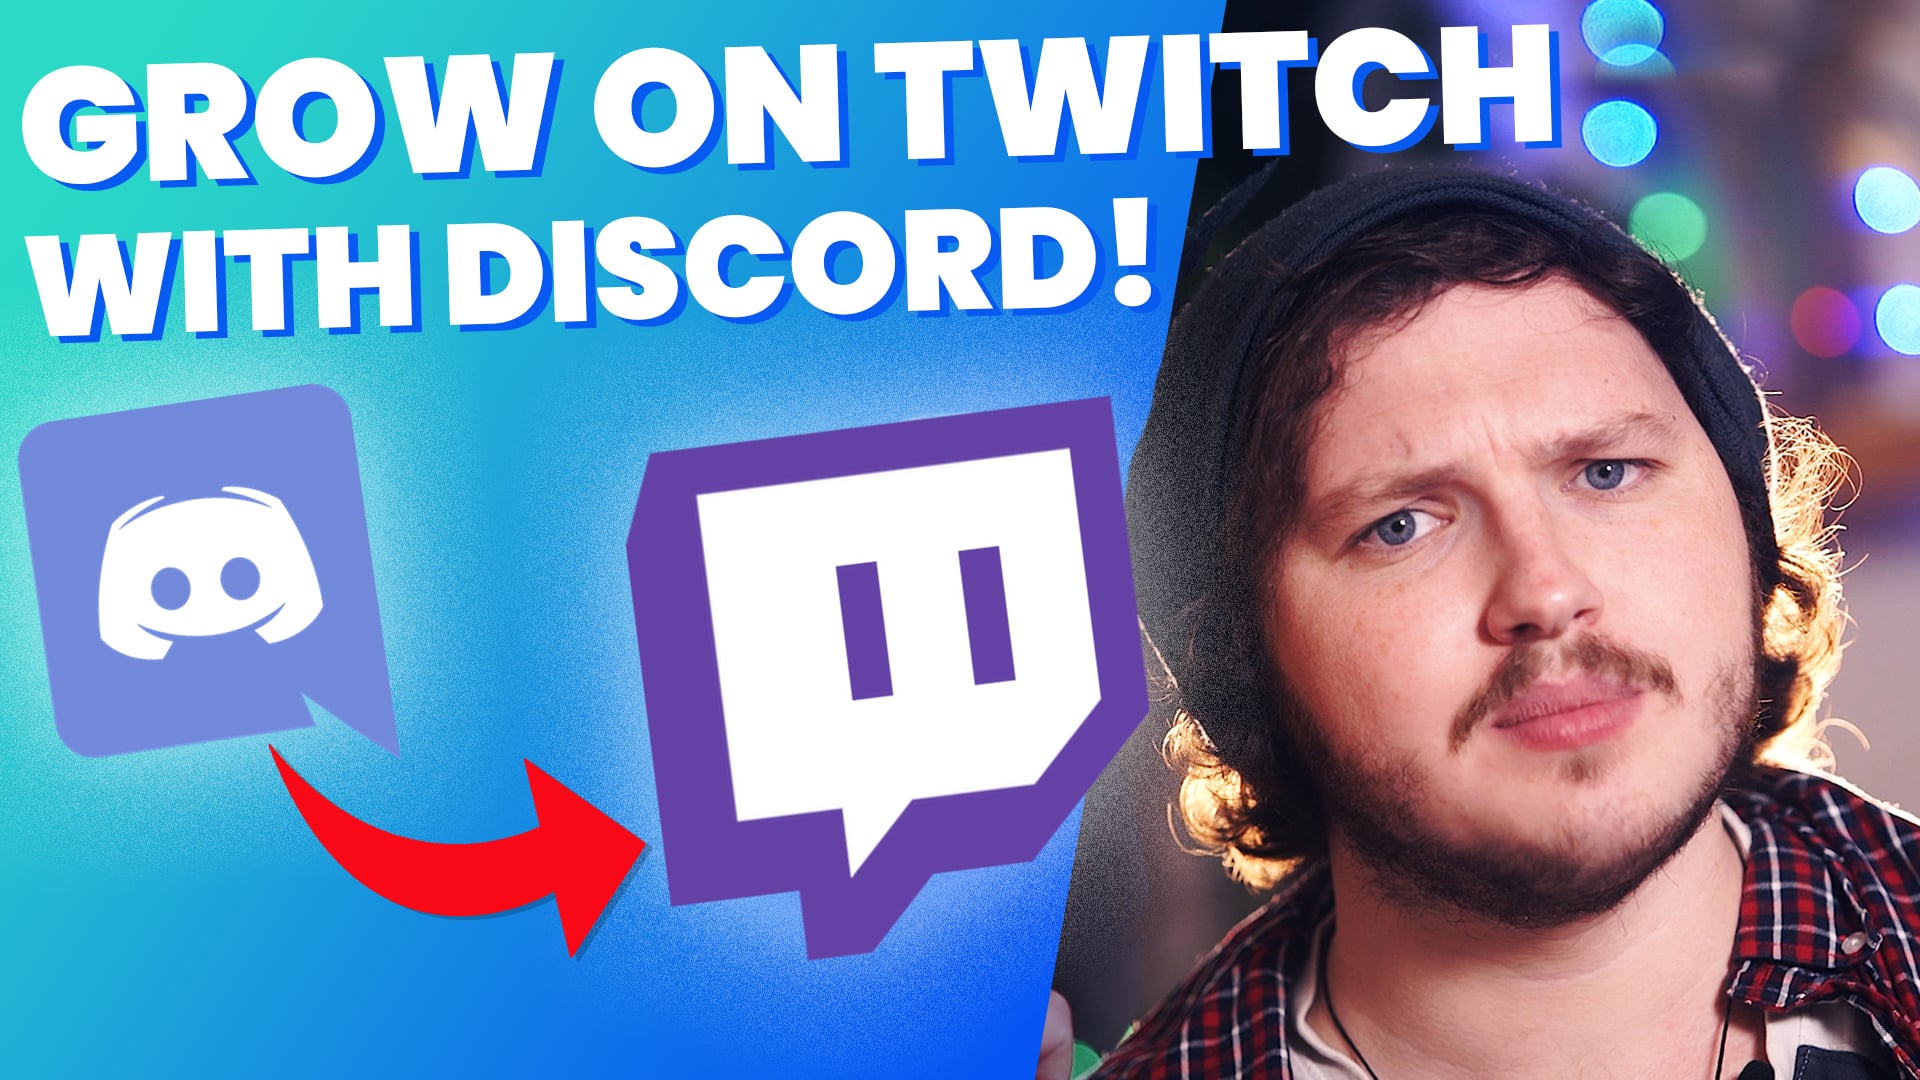 Discord: How to Configure Streamer Mode - Technipages